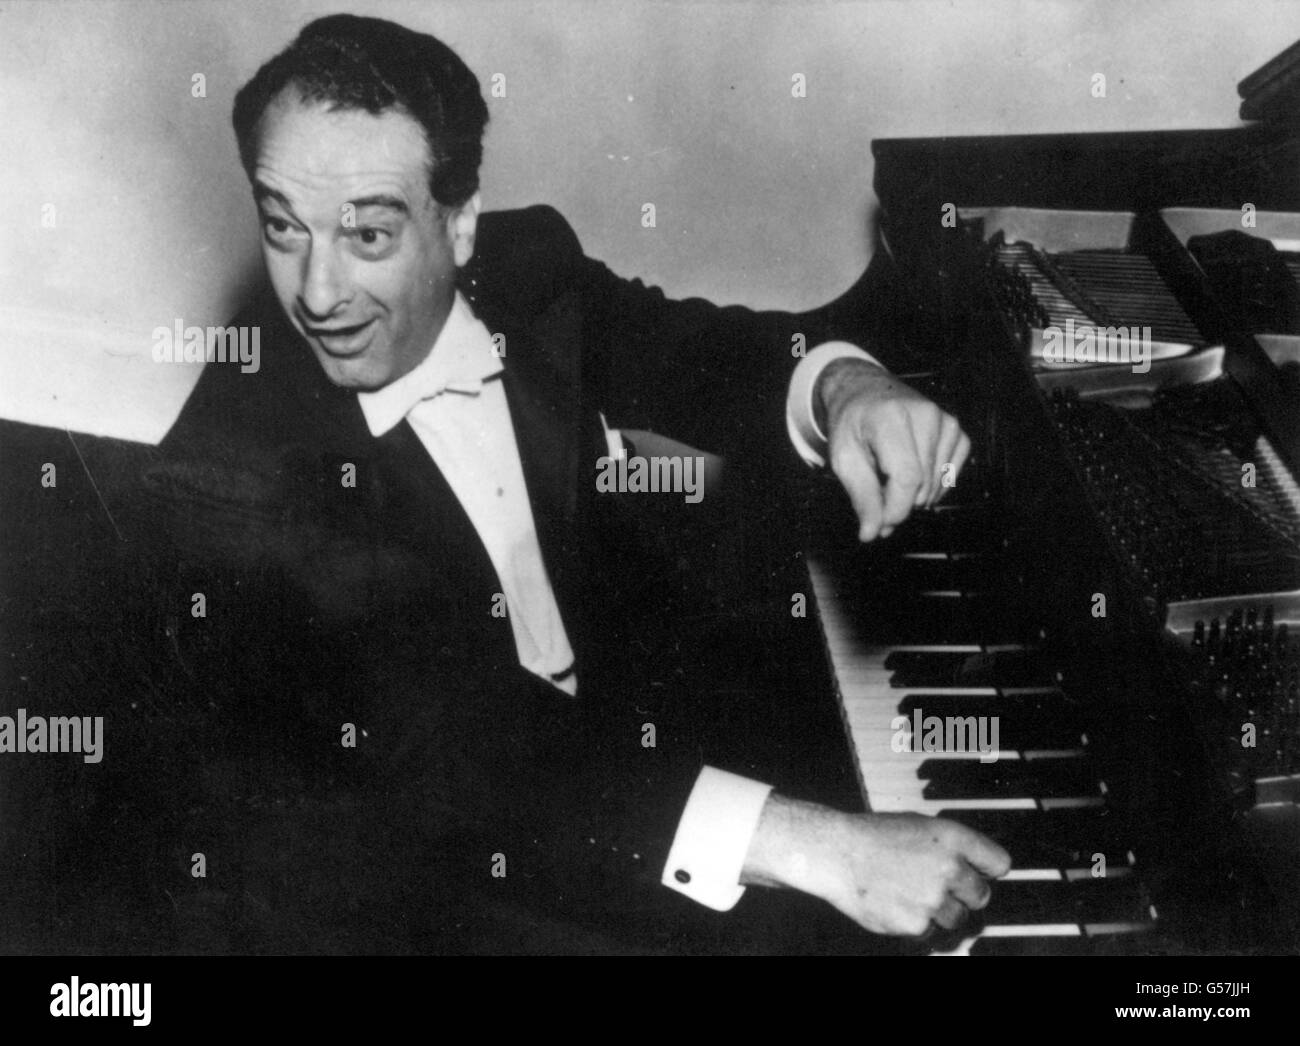 Victor Borge the prodigious pianist who mixed subtle comedy with his music.  Victor Borge, the wacky pianist whose whimsical approach to the classics  earned him the nickname the "clown prince of Denmark",